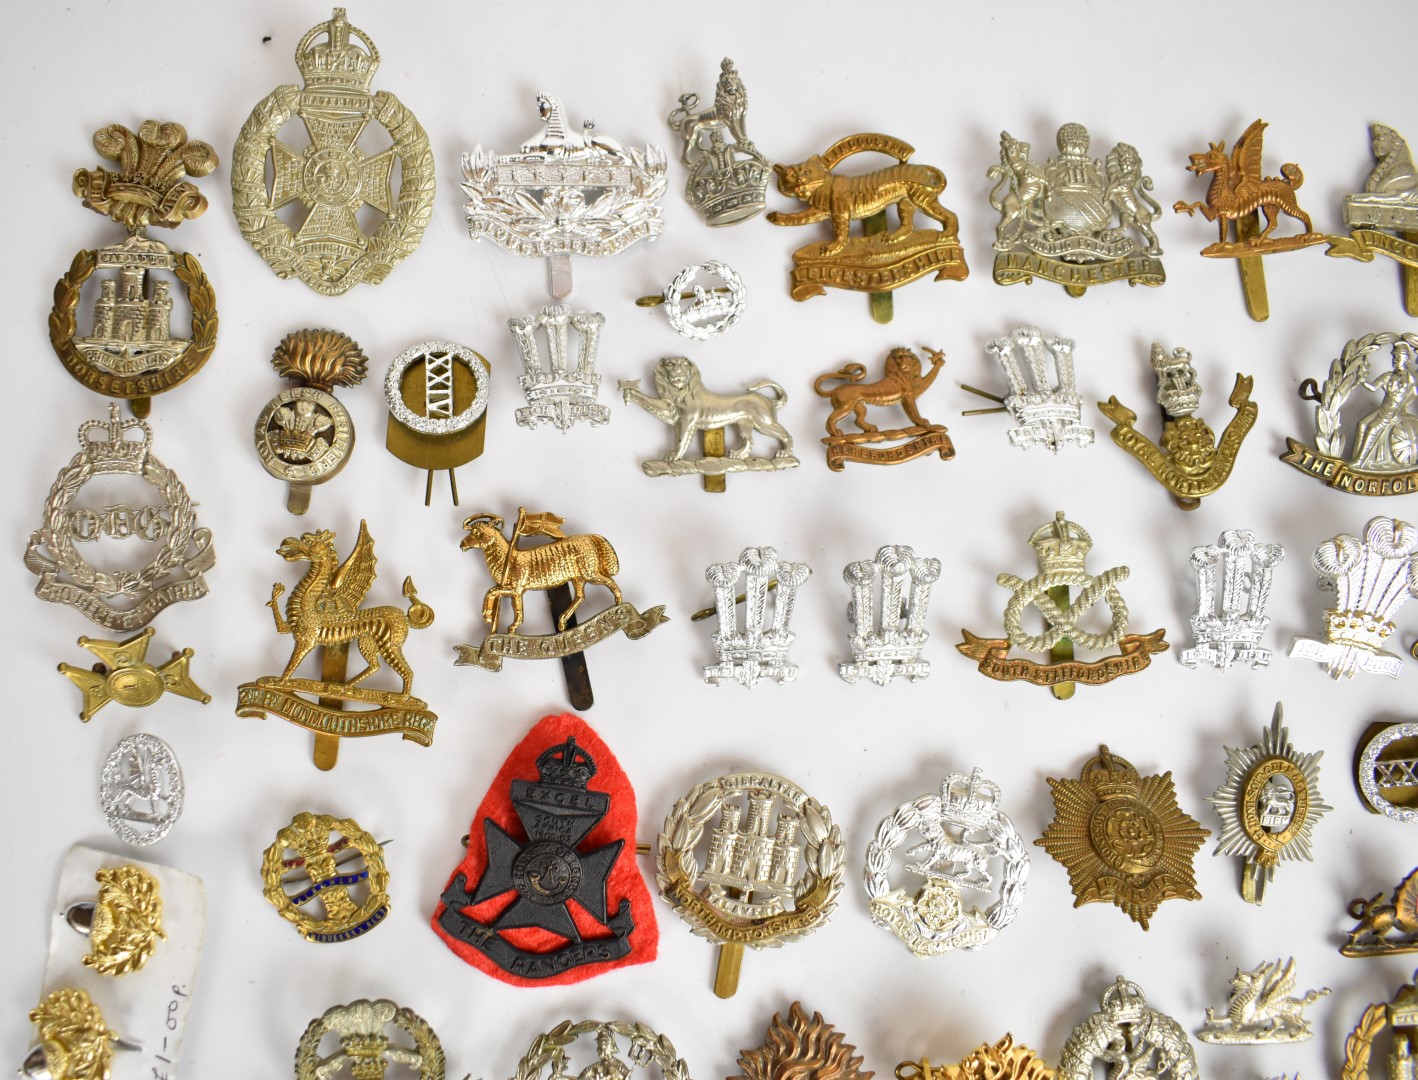 Large collection of approximately 100 British Army cap badges including Middlesex Regiment, - Image 5 of 5